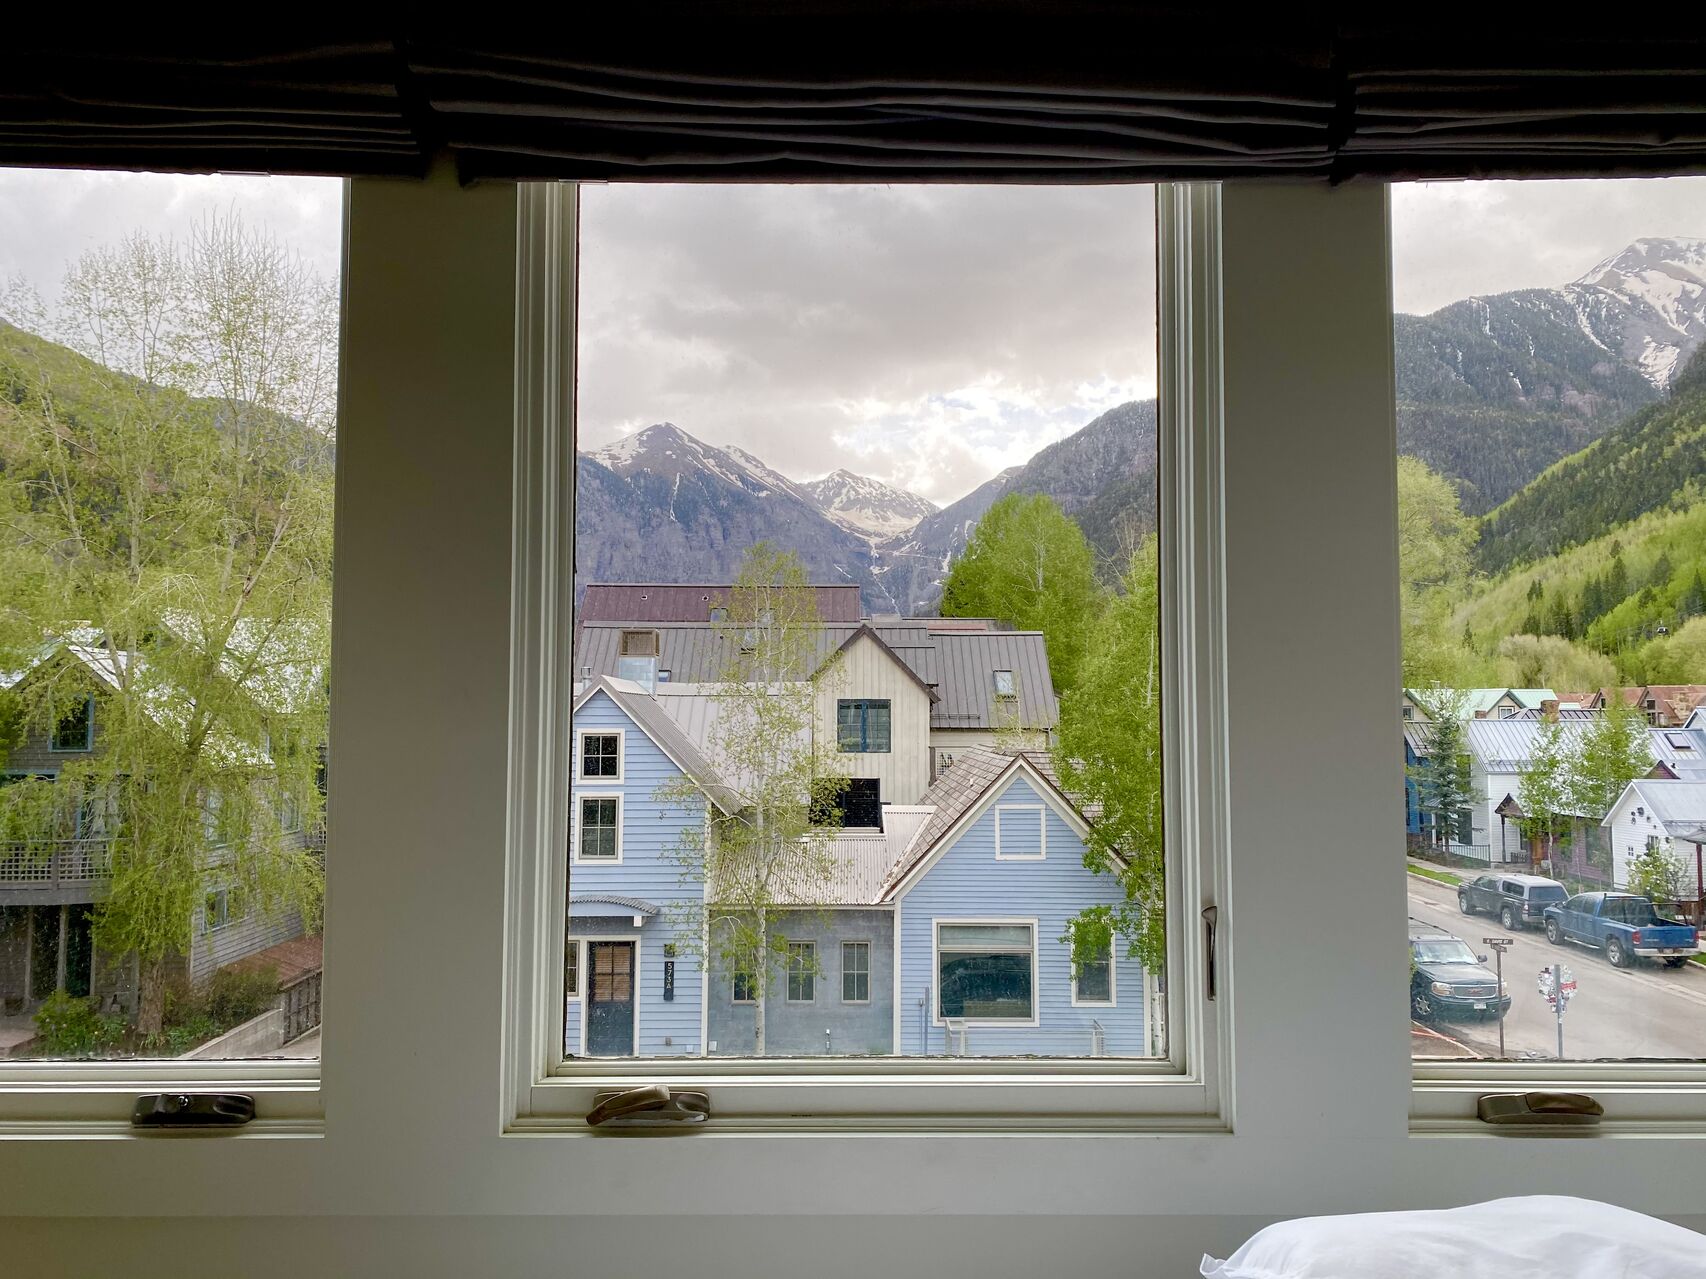 Outside view from inside our Telluride condo rental